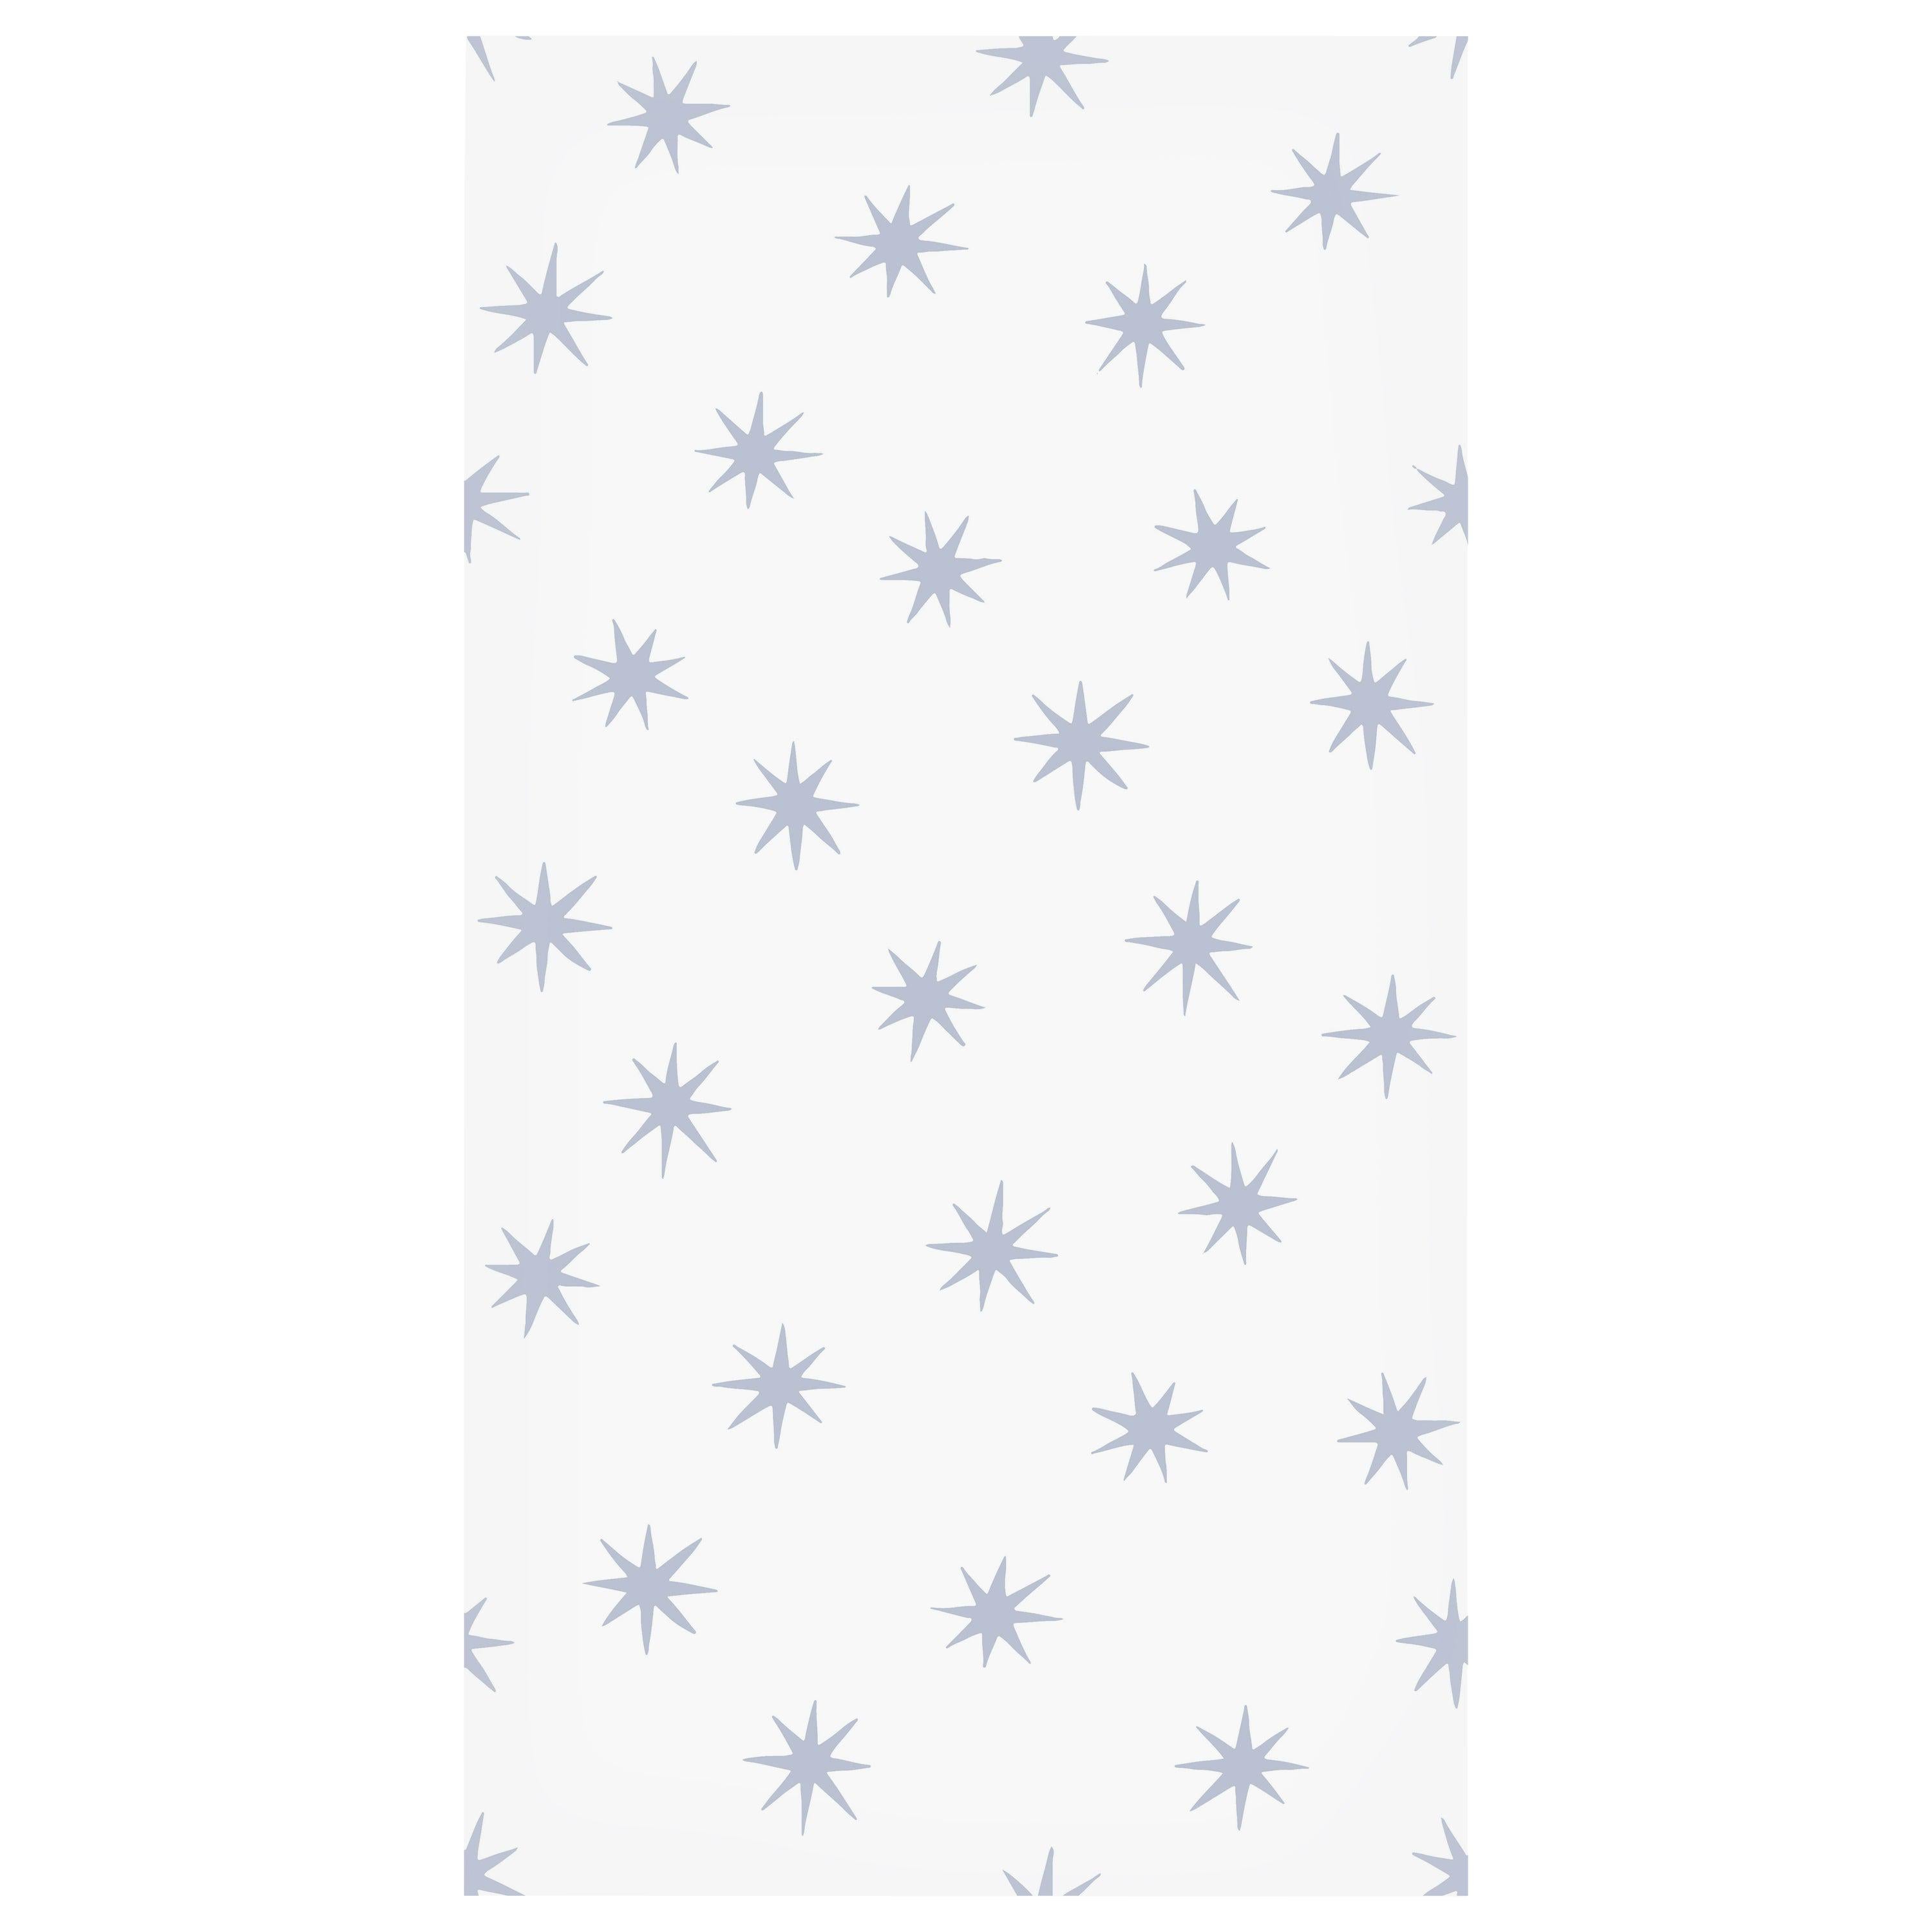 Stars in Zen Blue and White on Smooth Wallpaper For Sale